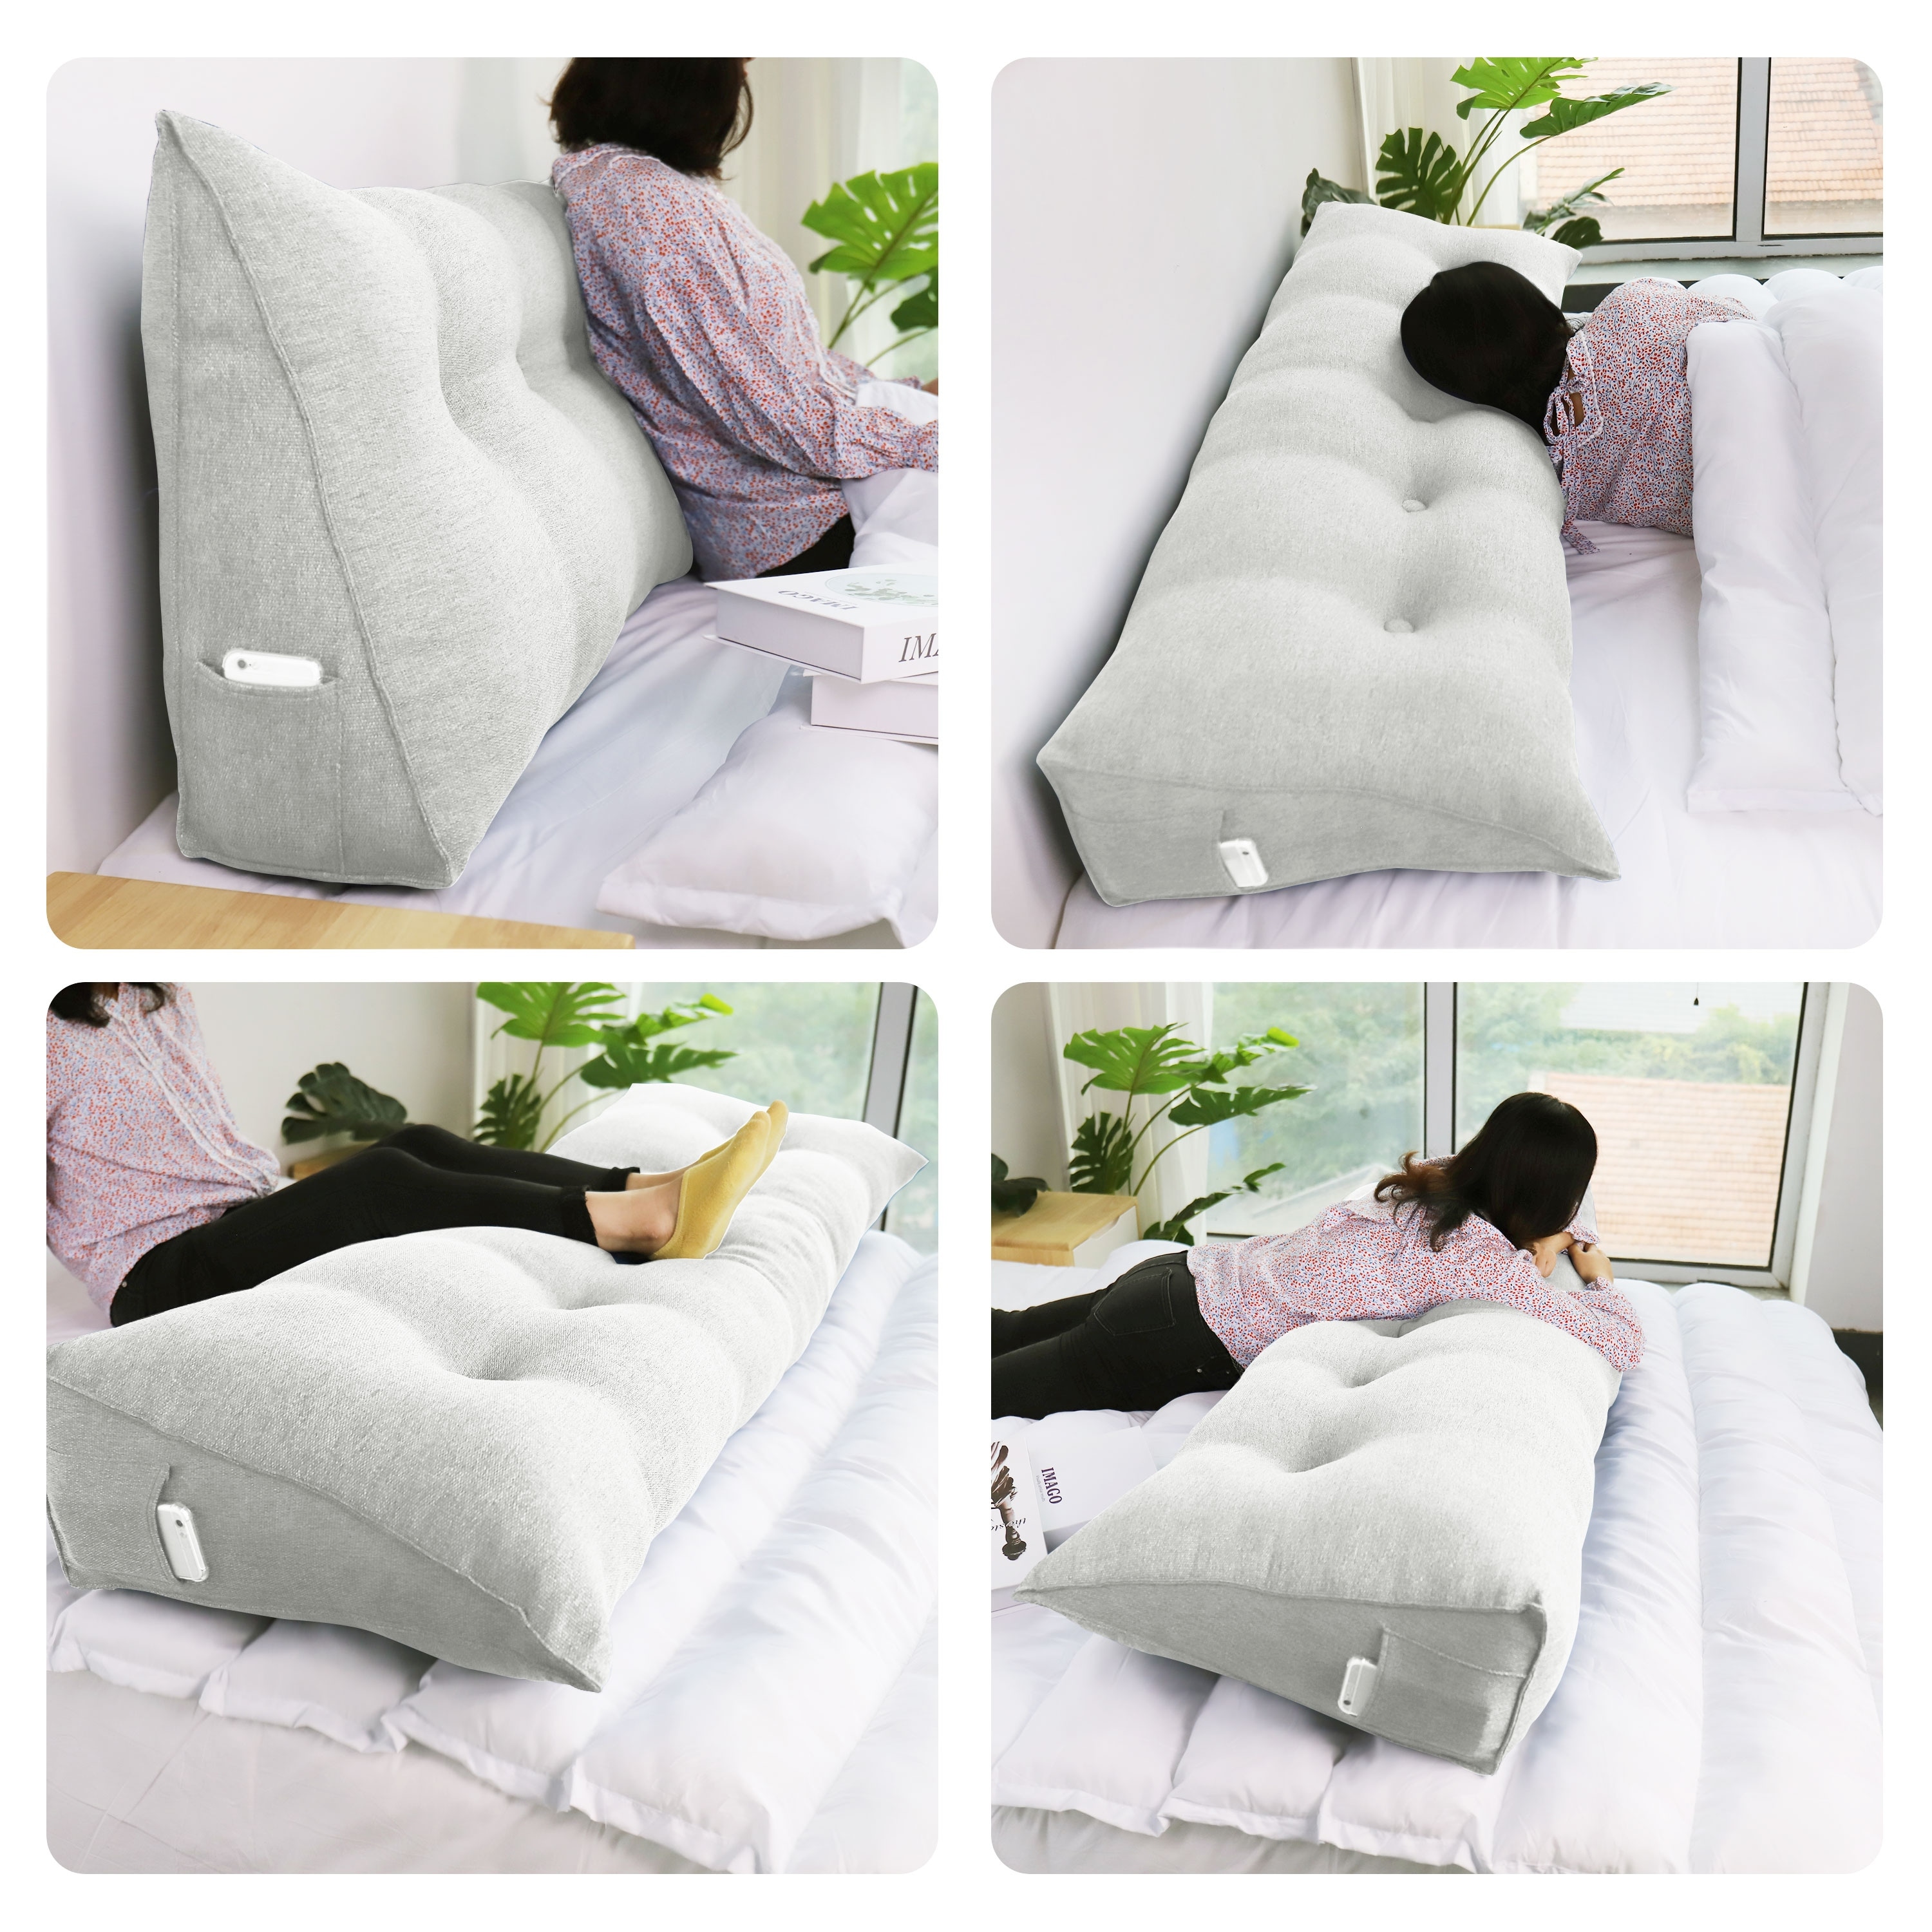 https://ak1.ostkcdn.com/images/products/is/images/direct/f388fa9f4bb98830fbdb64c0eb9e3b767911e1aa/WOWMAX-Bed-Rest-Wedge-Bolster-Reading-Pillow-Ivory-Daybed-Back-Support.jpg